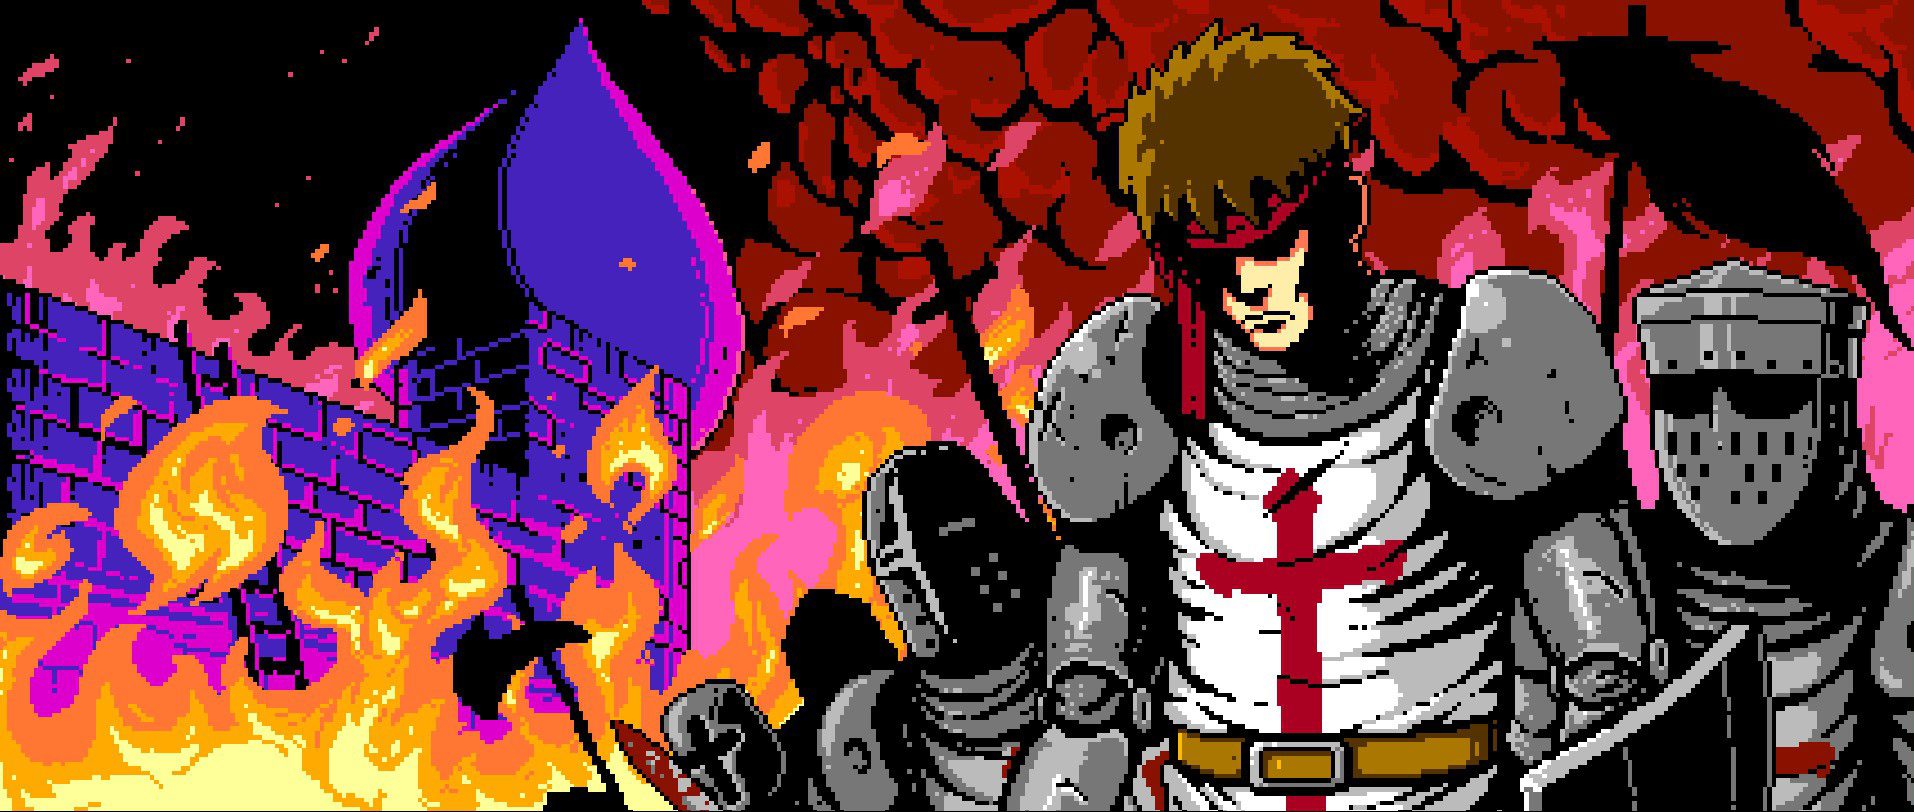 Infernax scratches that Castlevania II: Simon’s Quest itch